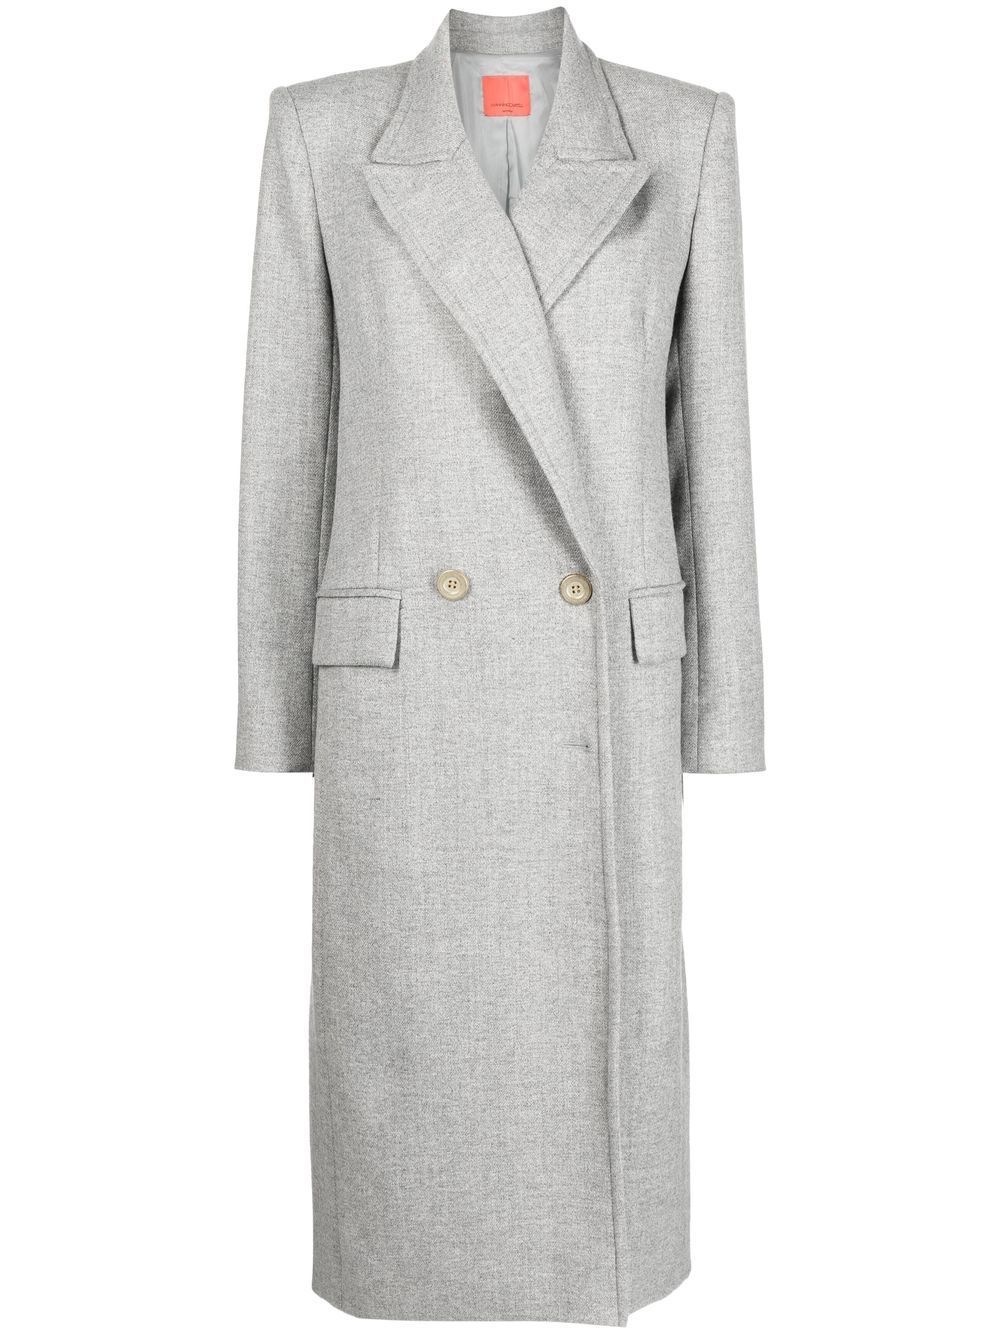 MANNING CARTELL Shapes & Shadows double-breasted Coat - Farfetch | Farfetch Global